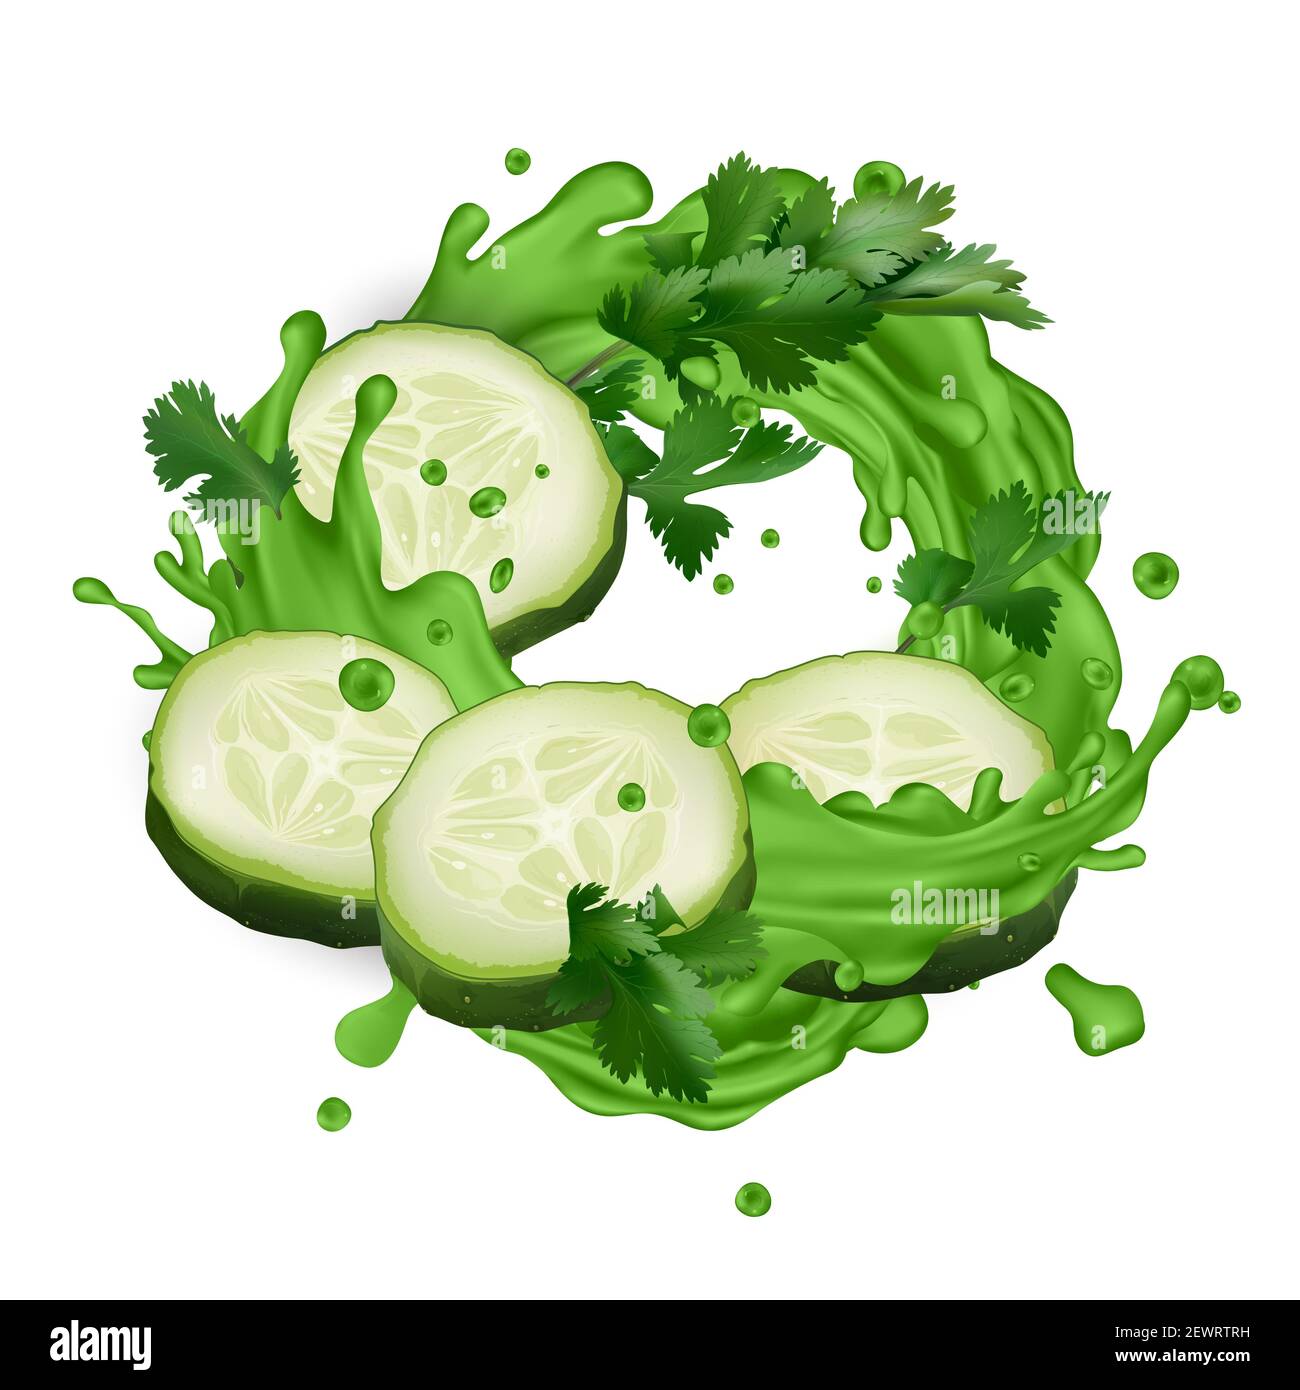 Green juice splash with cucumber slices and celery leaves Stock Photo